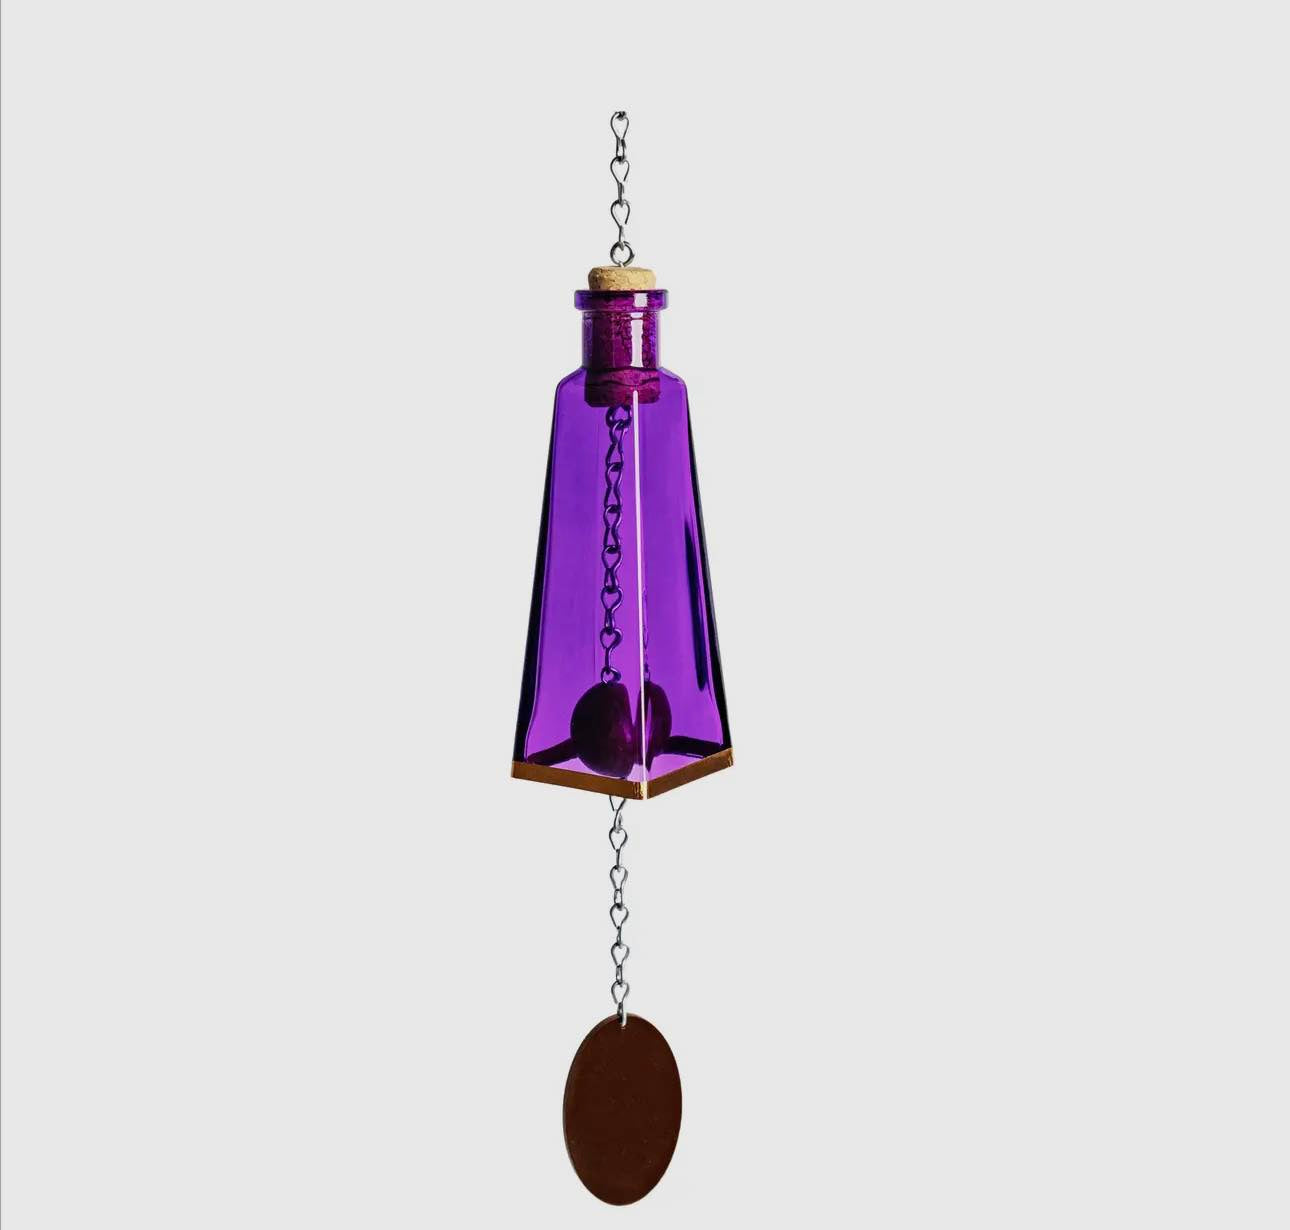 Glass Pyramid-Shaped Bottle Wind Chimes